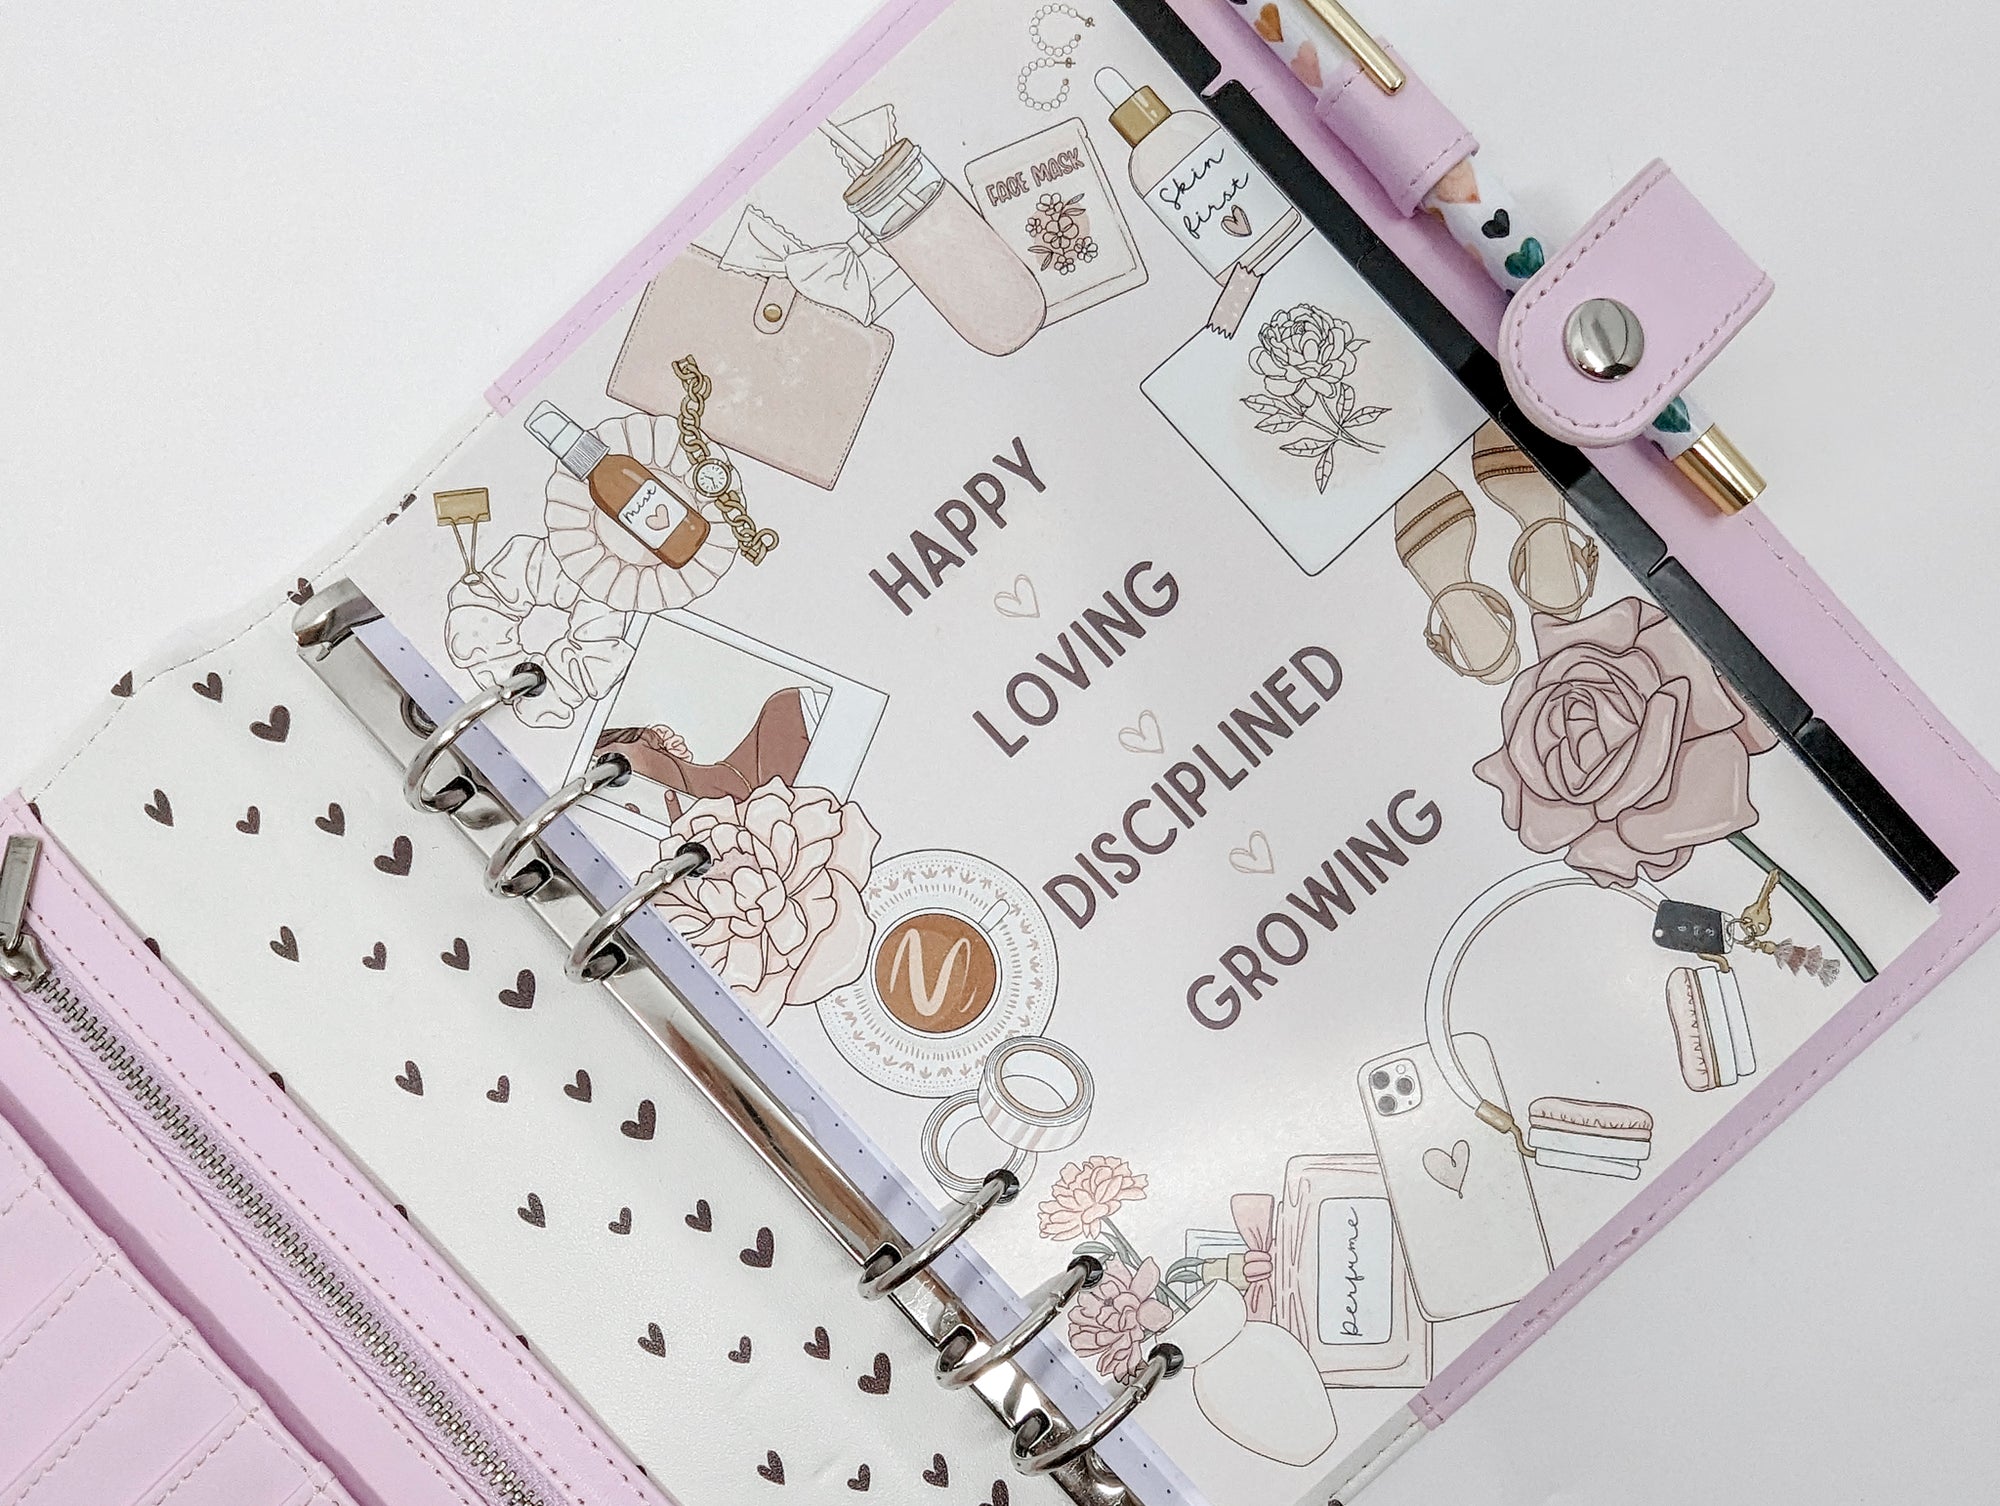 Happy Loving Disciplined Growing Dashboard (A5 size)